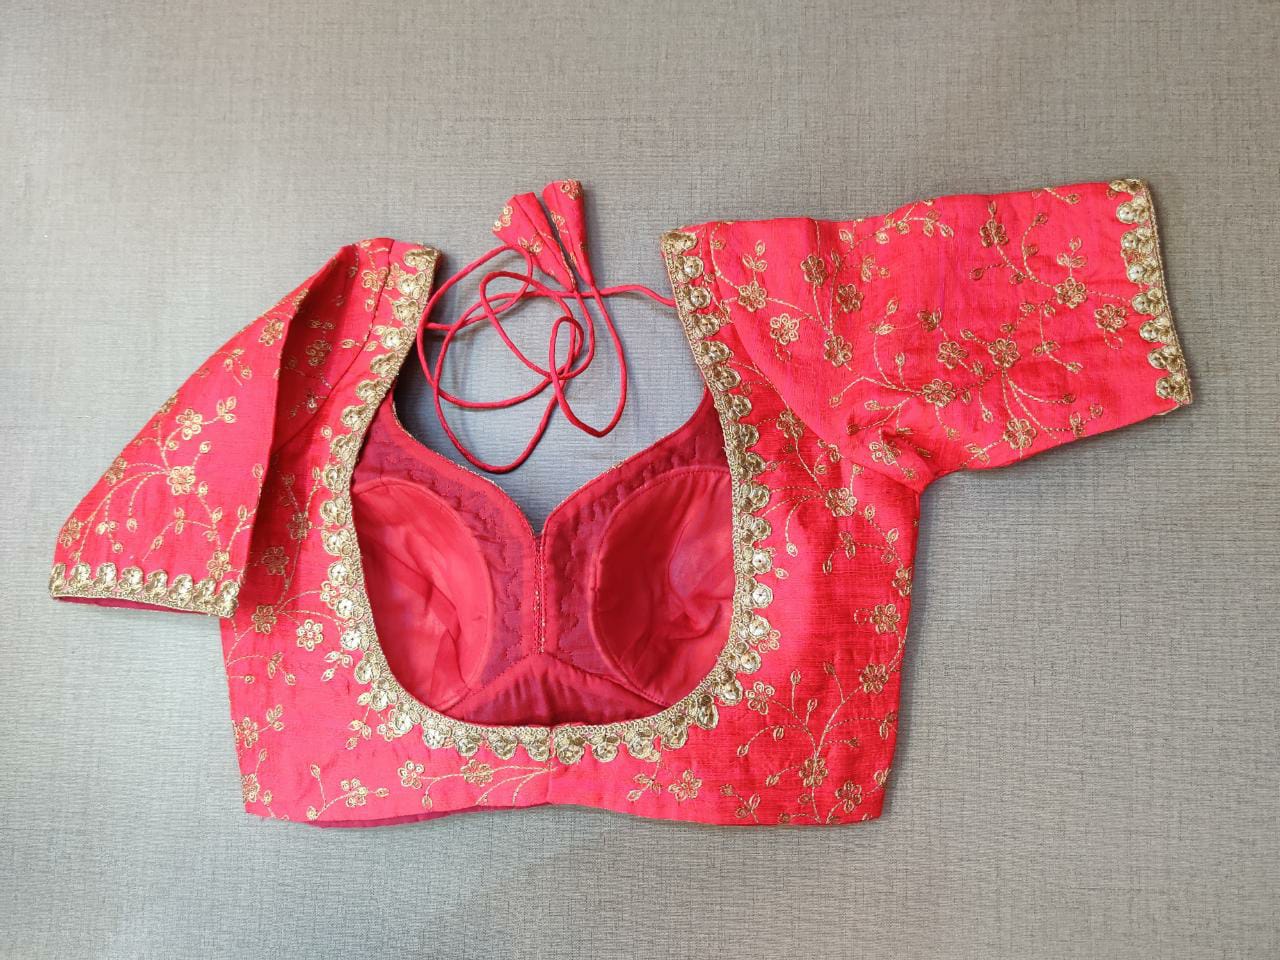 Buy stylish pink embroidered designer ready made saree blouse in raw silk online in USA. Adorned in floral jaal pattern designer sari blouse, blouse in raw silk with sweetheart cut neckline, long sleeves, designer sari blouses online, raw silk fabric, sari blouses from Pure Elegance Indian fashion store in USA.- Back.